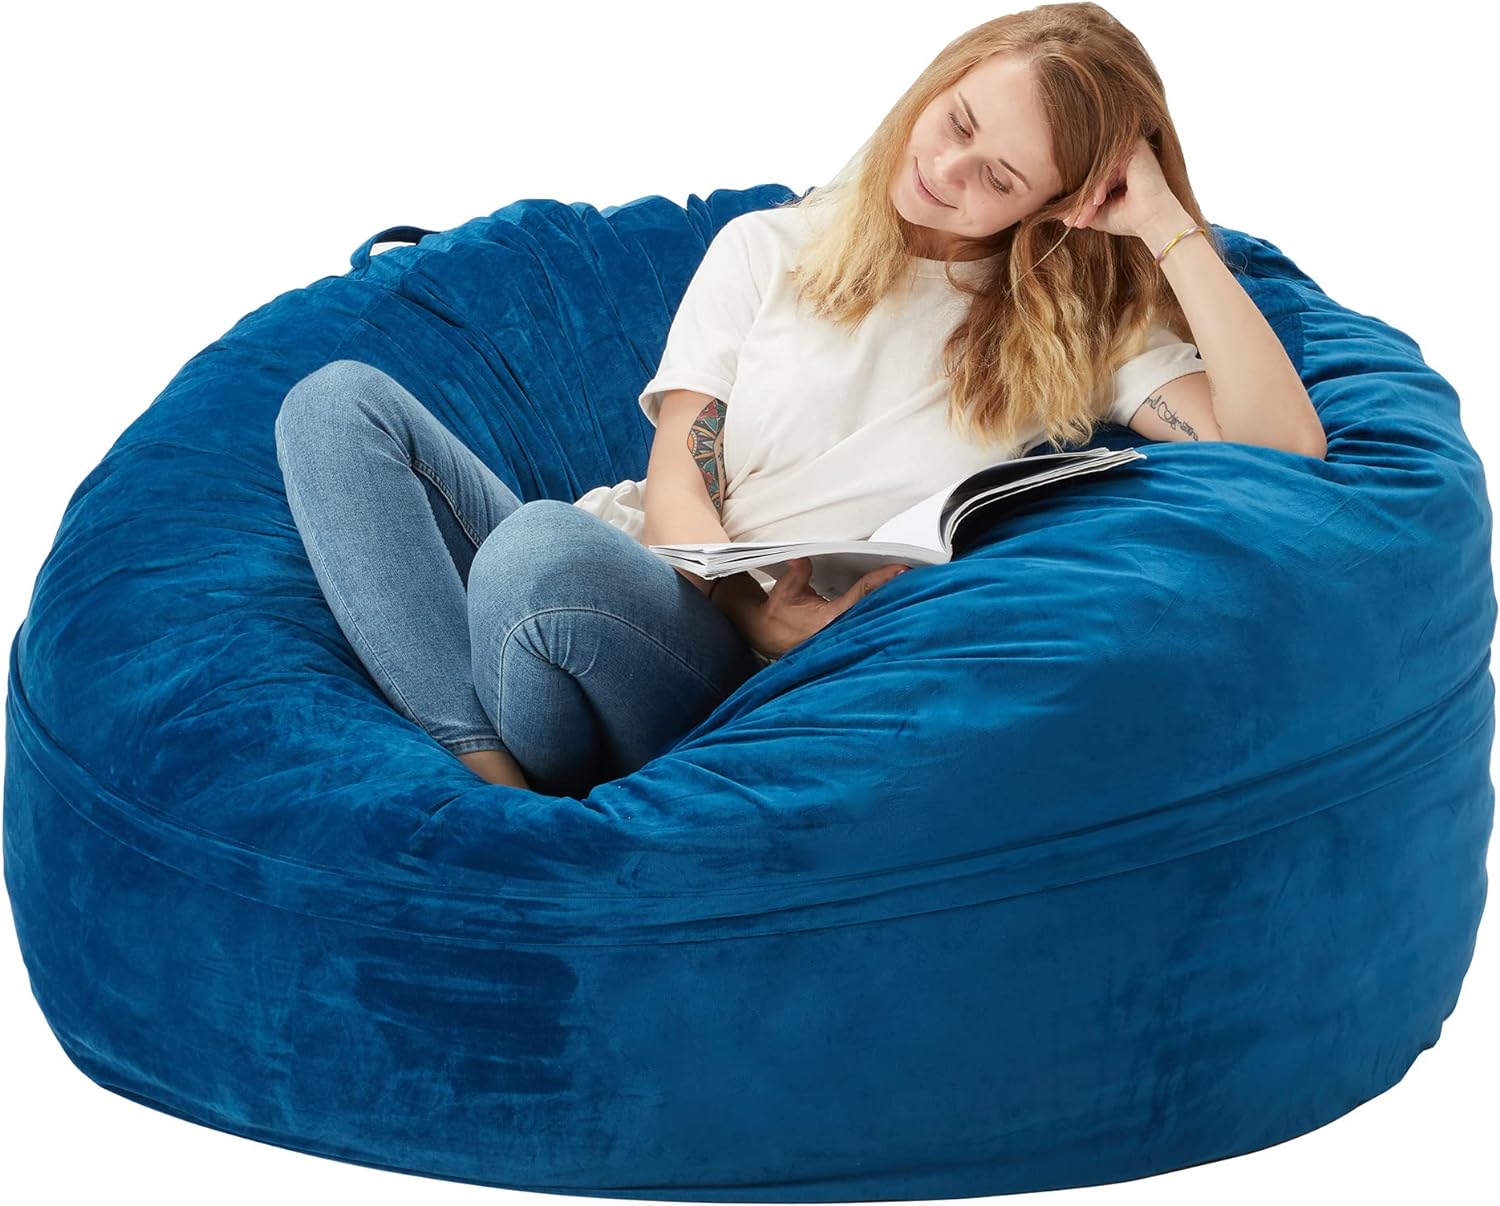 I got this beanbag chair for my partner. She loves to lay in it and it' a nice, big size. It' so comfy that she often sleeps in it all night! It also has a useful pocket built into it and a soft, zip-on cover that makes it easy to clean. It can get a bit compressed, but it' easy to fluff it back up by rotating it and shaking it.